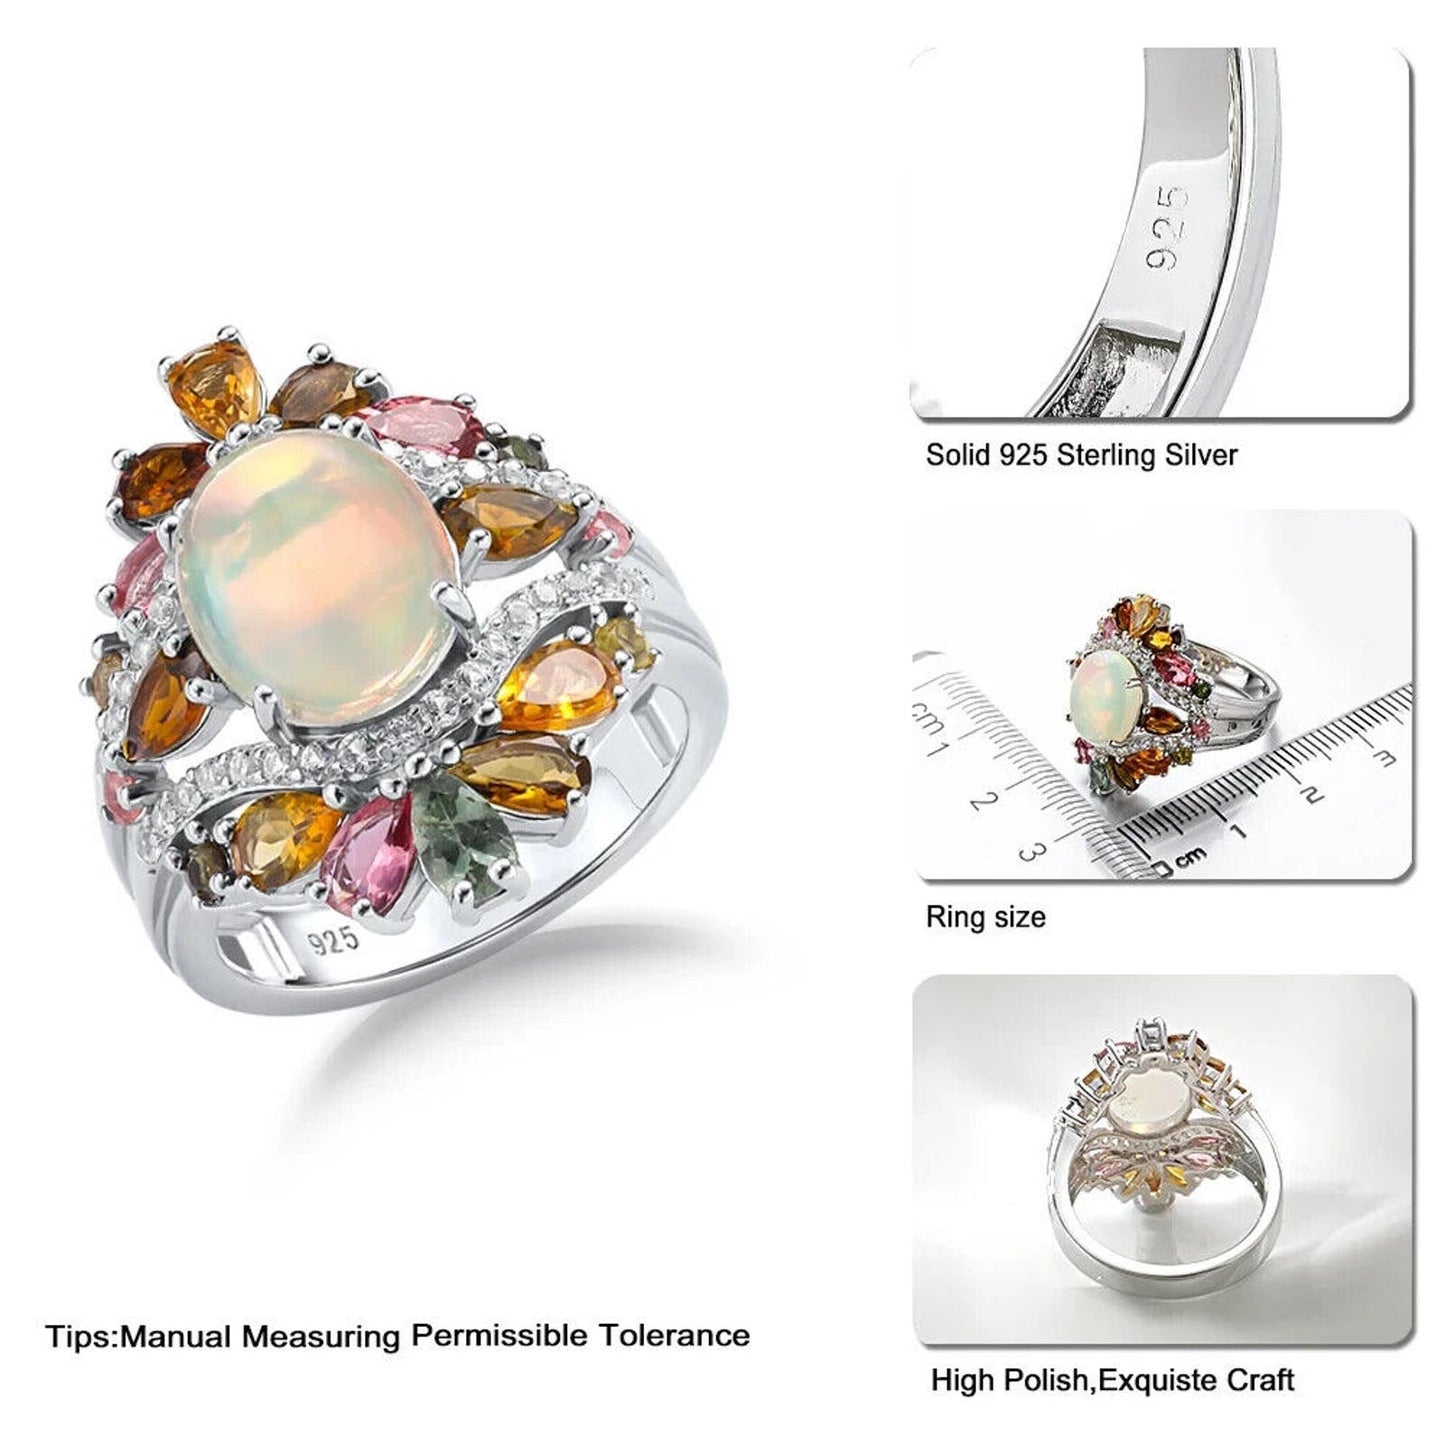 Fire Opal and Tourmaline Cluster Statement Ring